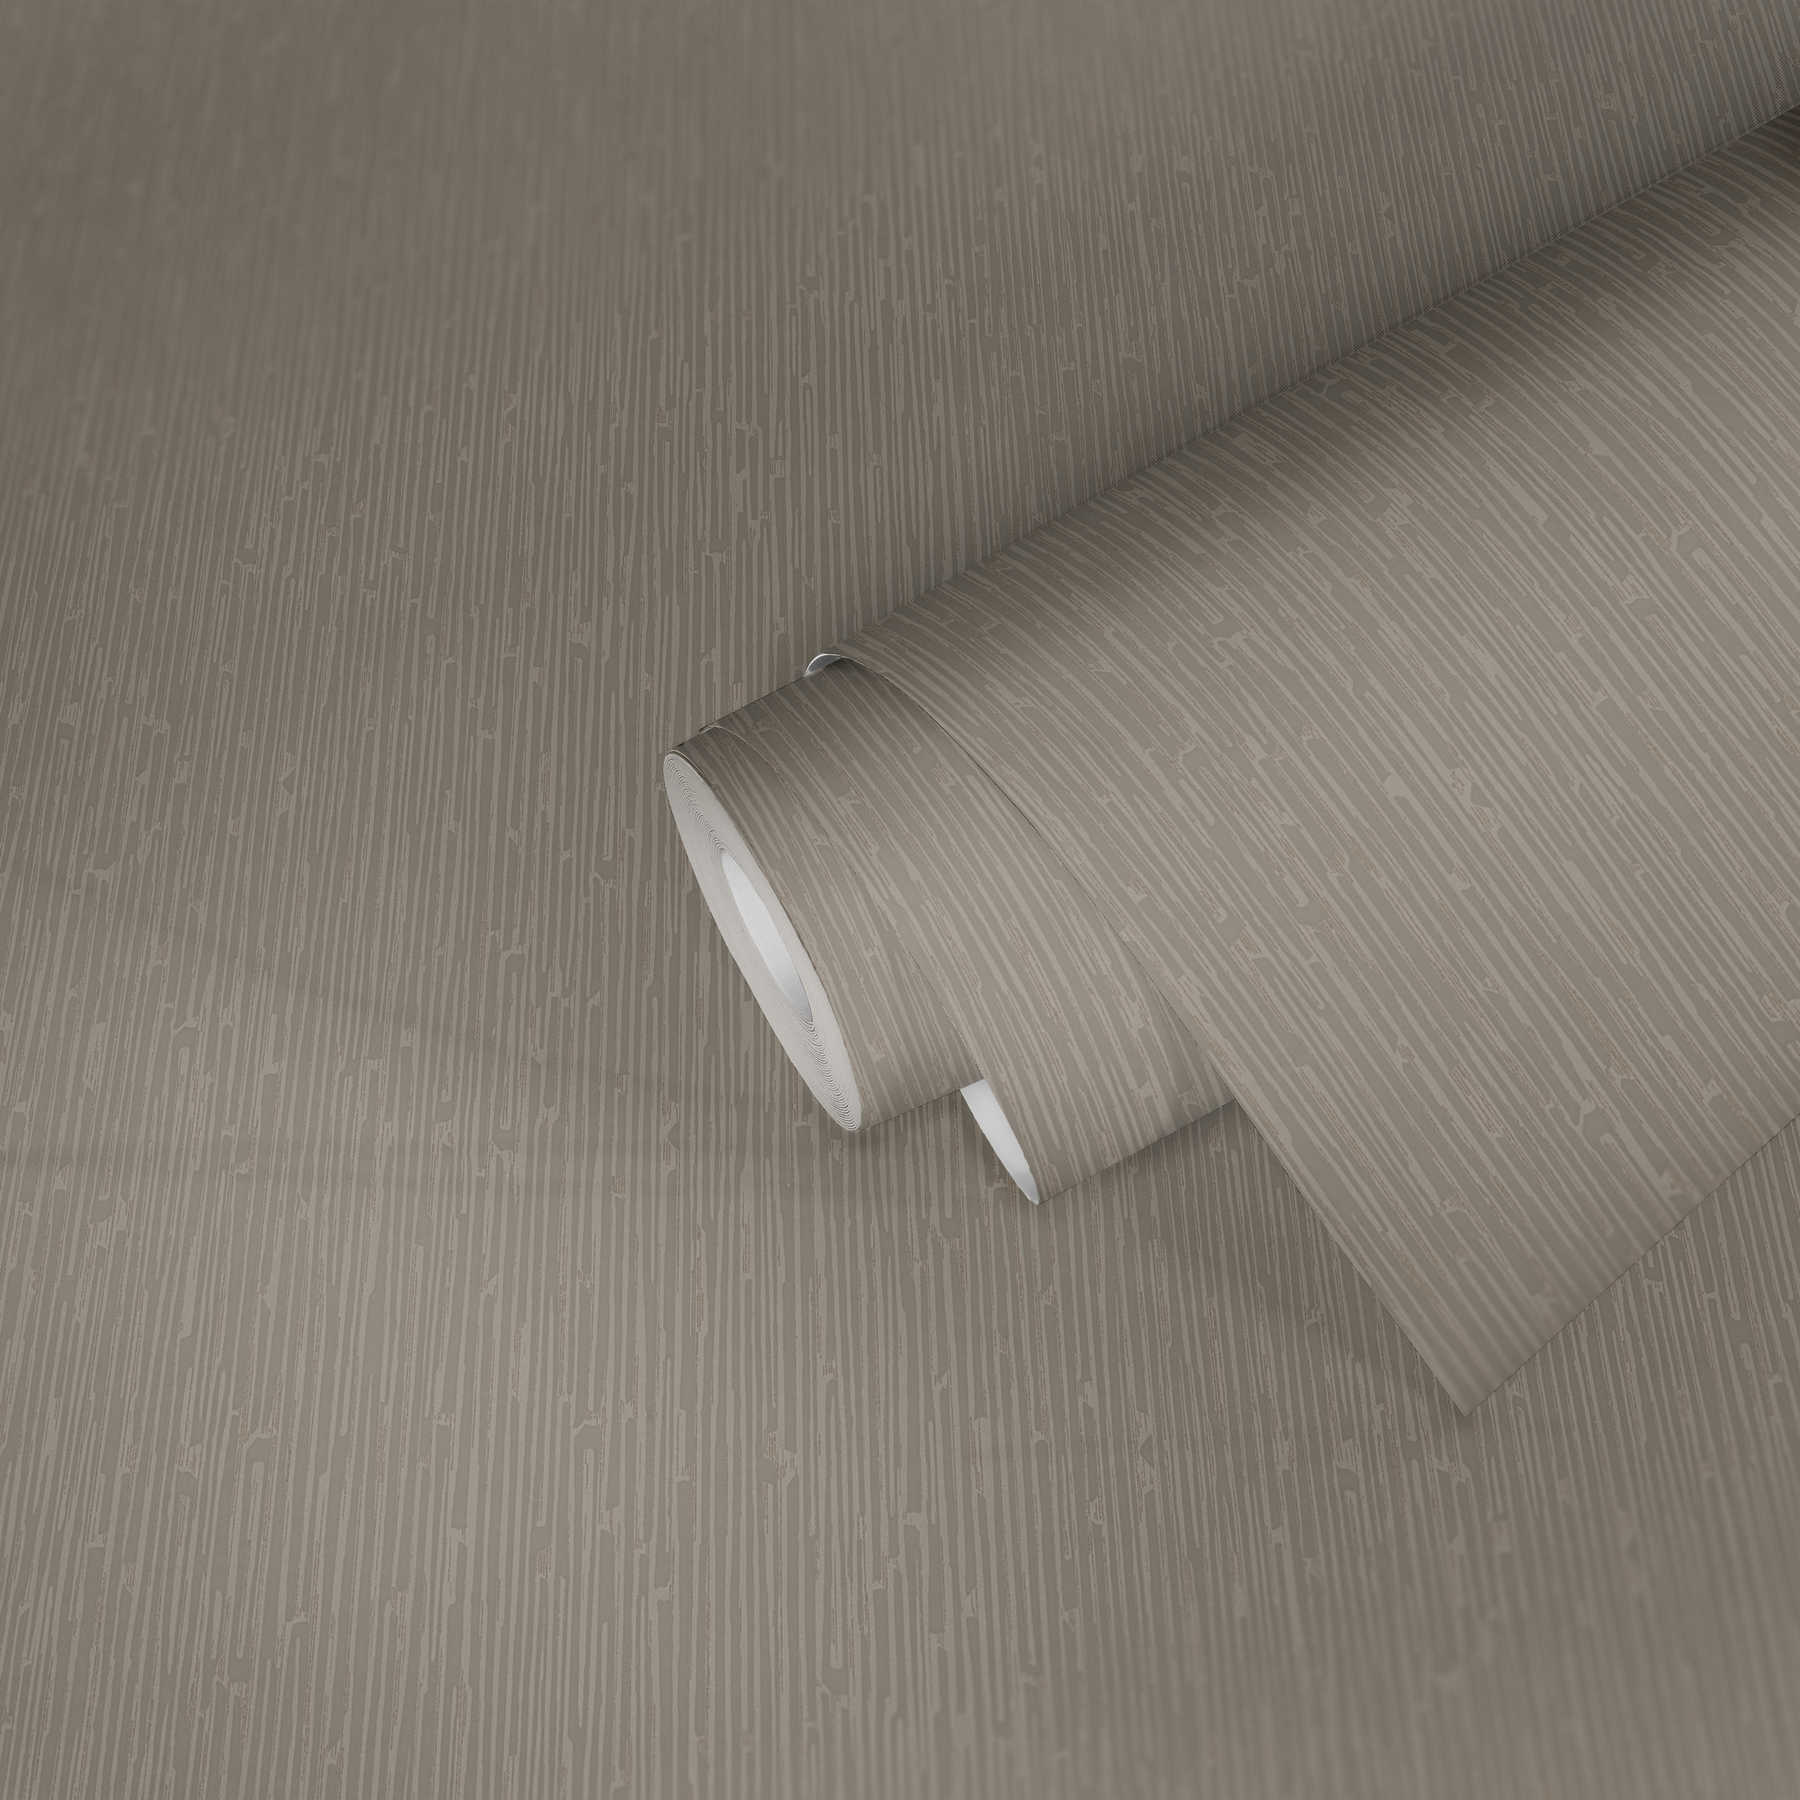             Non-woven wallpaper taupe with tone-on-tone texture effect
        